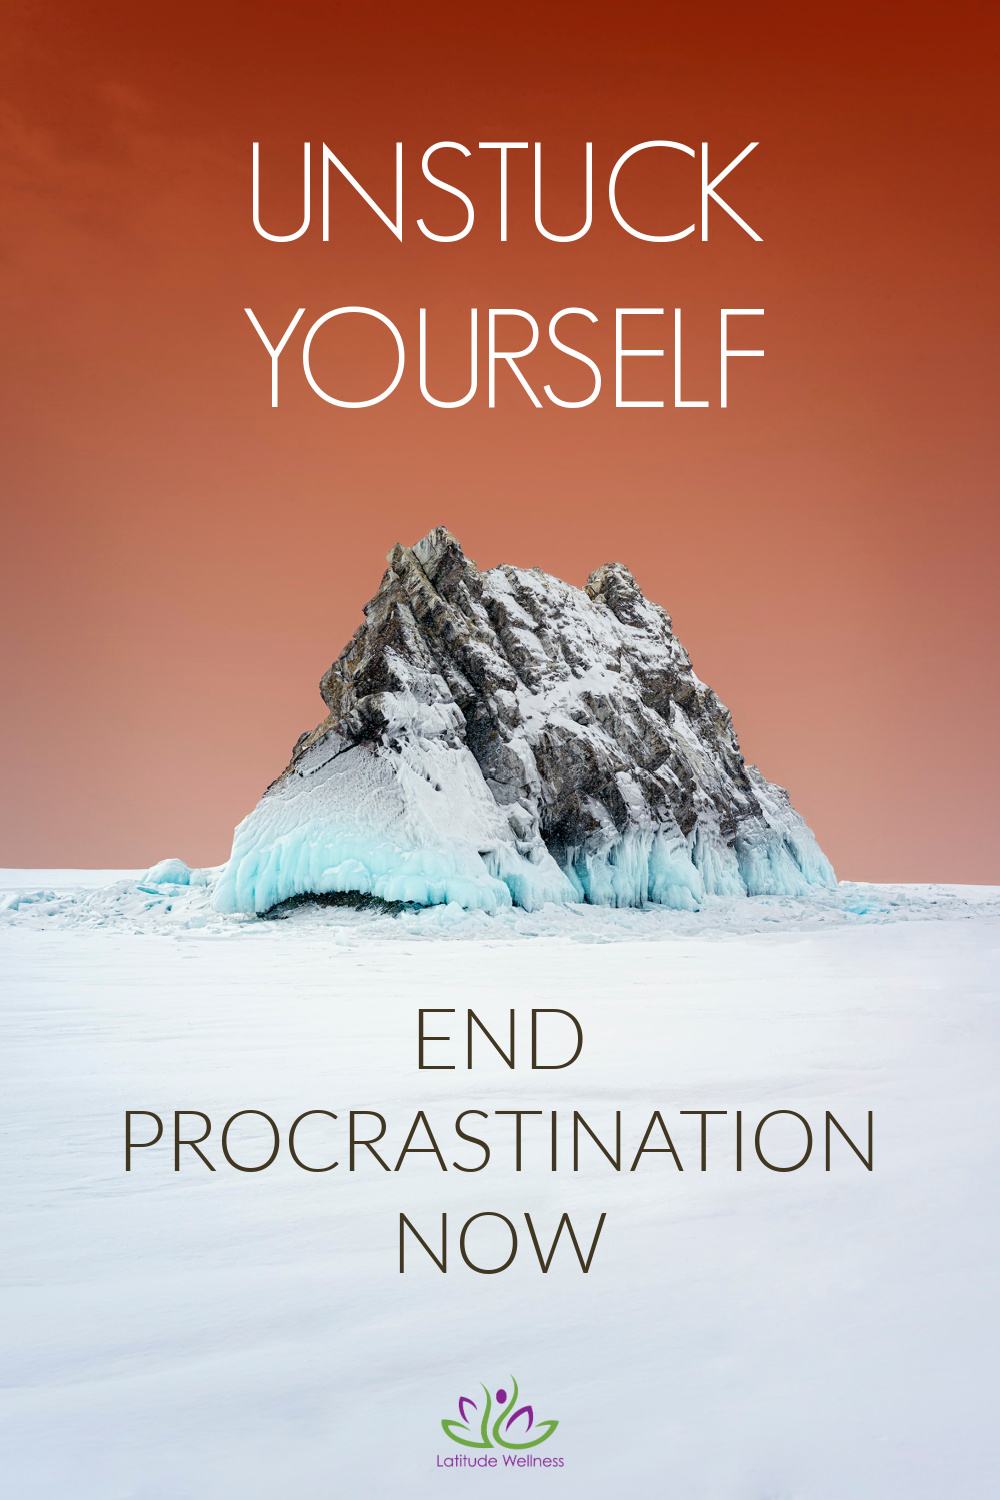 You are currently viewing End Procrastination & Unstuck Yourself